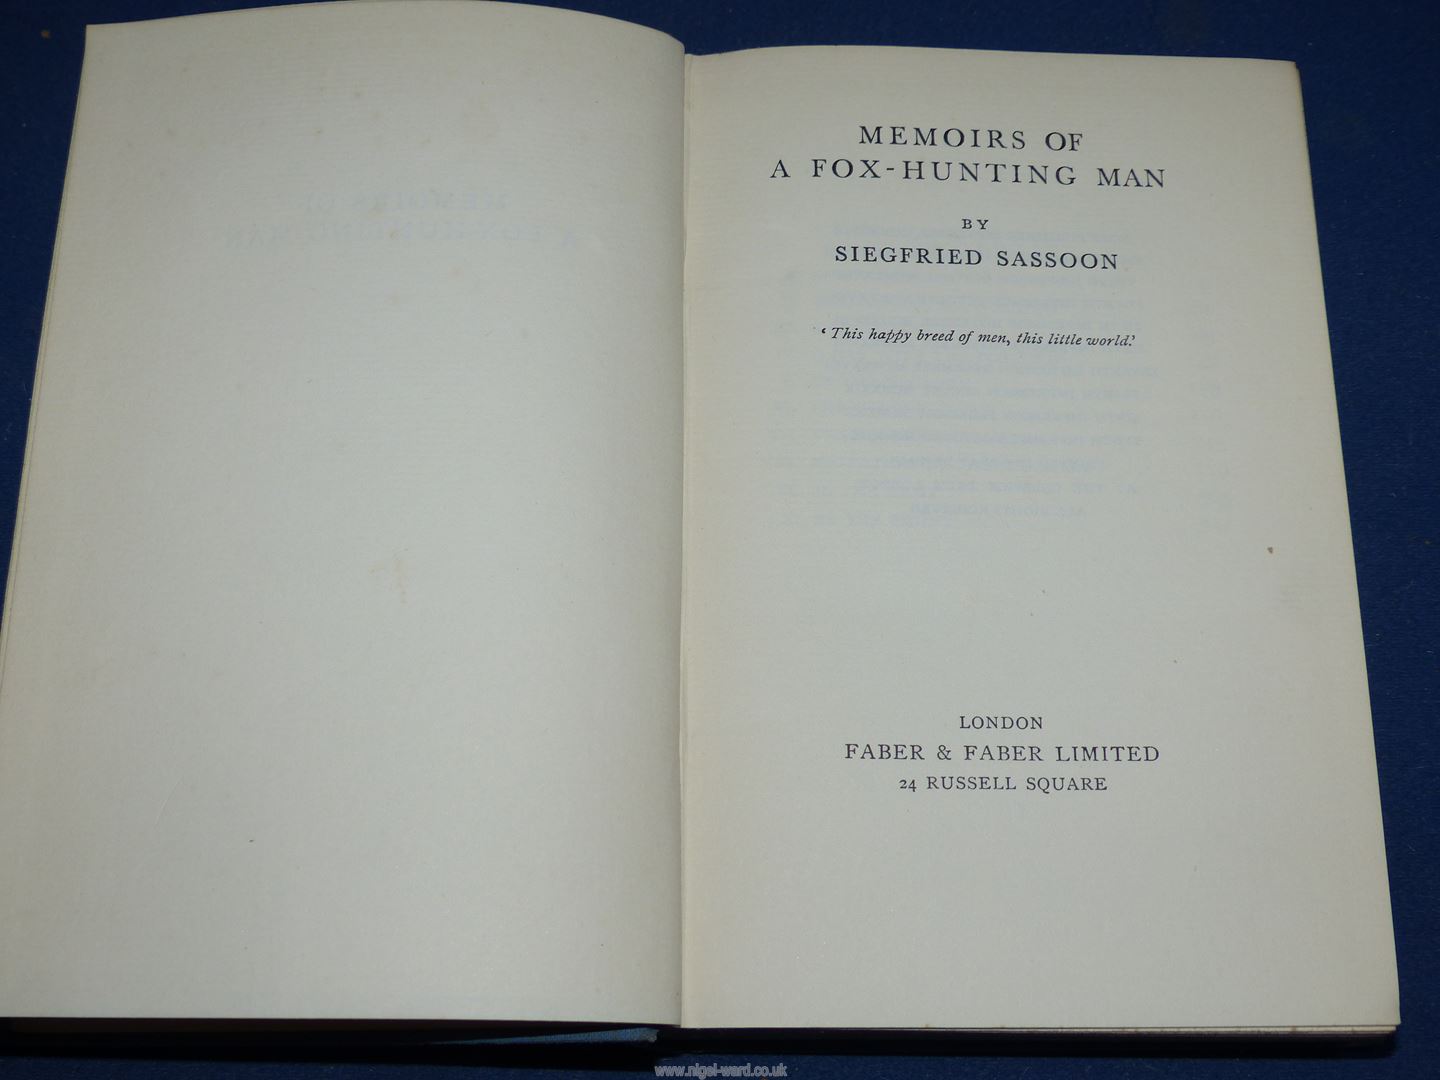 A small collection of works by Siegfried Sassoon including Memoirs of a Fox-Hunting Gentleman - Image 11 of 29